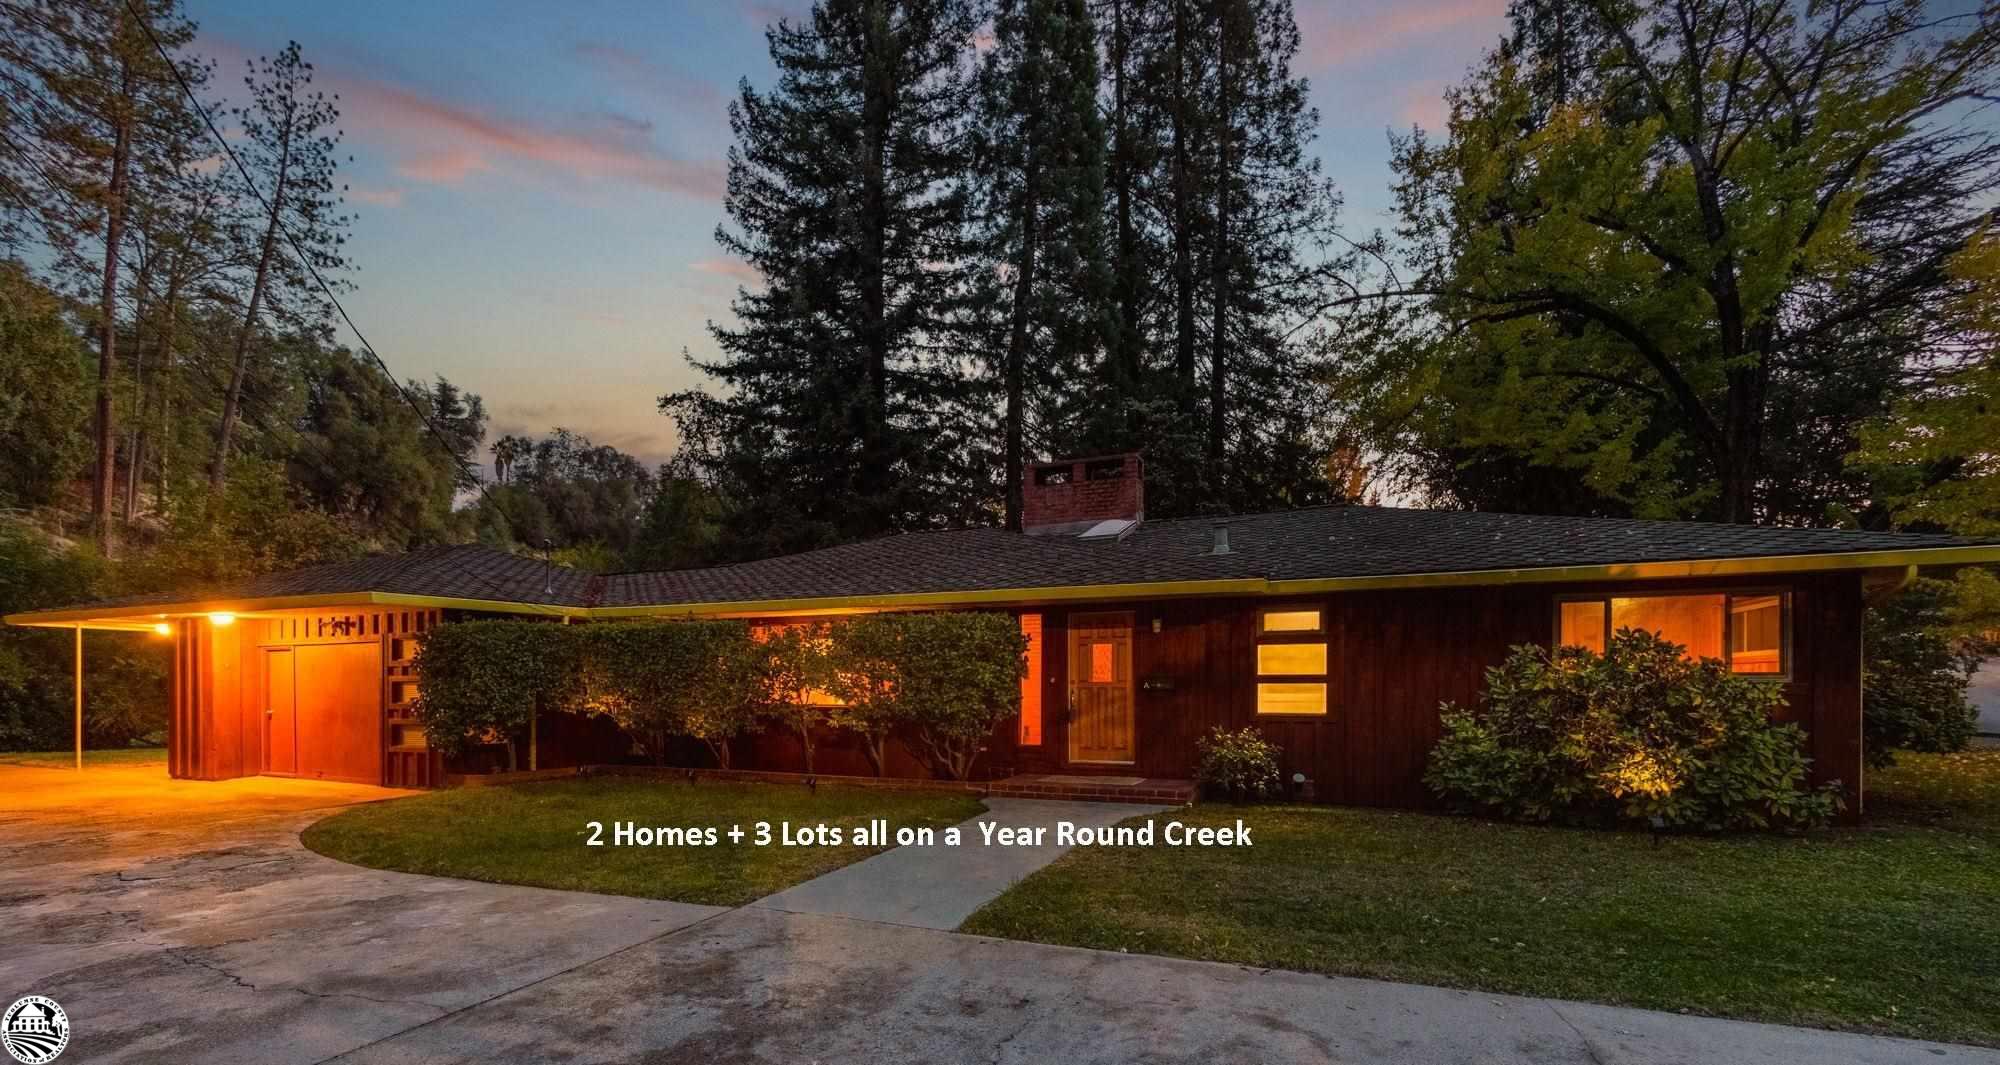 LOVELY MID CENTURY style home + IN LAW unit with a private, country feel near the heart of downtown Sonora. CREEKSIDE setting with over 500' of Woods Creek in your backyard with RIPARIAN RIGHTS included. 3 legal parcels make-up this enchanting setting with each parcel touching the creek. The home and in-unit occupy a 1/4 acre, while the other 2 legal parcels provide privacy and endless opportunities to garden and relax. The history of this "compound" is rich with stories of being a Christmas Tree farm, gold panning fun and year-round splashing in the creek. If you have a love for classic homes, this property is sure to capture your heart. The large roof overhang with soffits provides not only protection against the elements, but a place to relax and soak up the landscape. Floor to ceiling windows provide a scenic backdrop in the family room. Upper accent lights and a hand carved locally sourced mantle add just the right touch to create an inviting space. The brick accent around the fireplace can be enjoyed from both the family and living room. Warm, solid knotty cedar throughout the living room, with the iconic planter bed and skylight above at the main entry. The kitchen captures views to the creek and yard and offers a quaint breakfast nook. All your bedrooms and a full bathroom are down the hall, with each bedroom having unique features. Built-in's, pristine wood paneling and spacious closets enhance these rooms. The hall bathroom offers tile flooring, a single vanity sink with accent lighting, powder desk and soaking tub. The second bathroom is near the garage offering a tile stall shower with green trim tile accents and glass block walls. As with all older homes you can find a basement beneath, providing a great space for canned goods and storage. The stand alone IN-LAW UNIT offers a 1 bedroom, 1 bathroom space with a full kitchen and year round sounds of the creek.  As you cross the bridge you will feel as though you are out in the countryside with all the established fruit trees and 2,000sqft garden just waiting to be revived. This home has provided many years of enjoyment to the owners and their family members who feel the easy walk to town is just another perk of residing here. Sonora CA is one of the oldest cities in California providing a great basecamp for visitors to explore Yosemite National Park, Pinecrest Lake, Eastern Sierras and as always excellent shopping and dining.